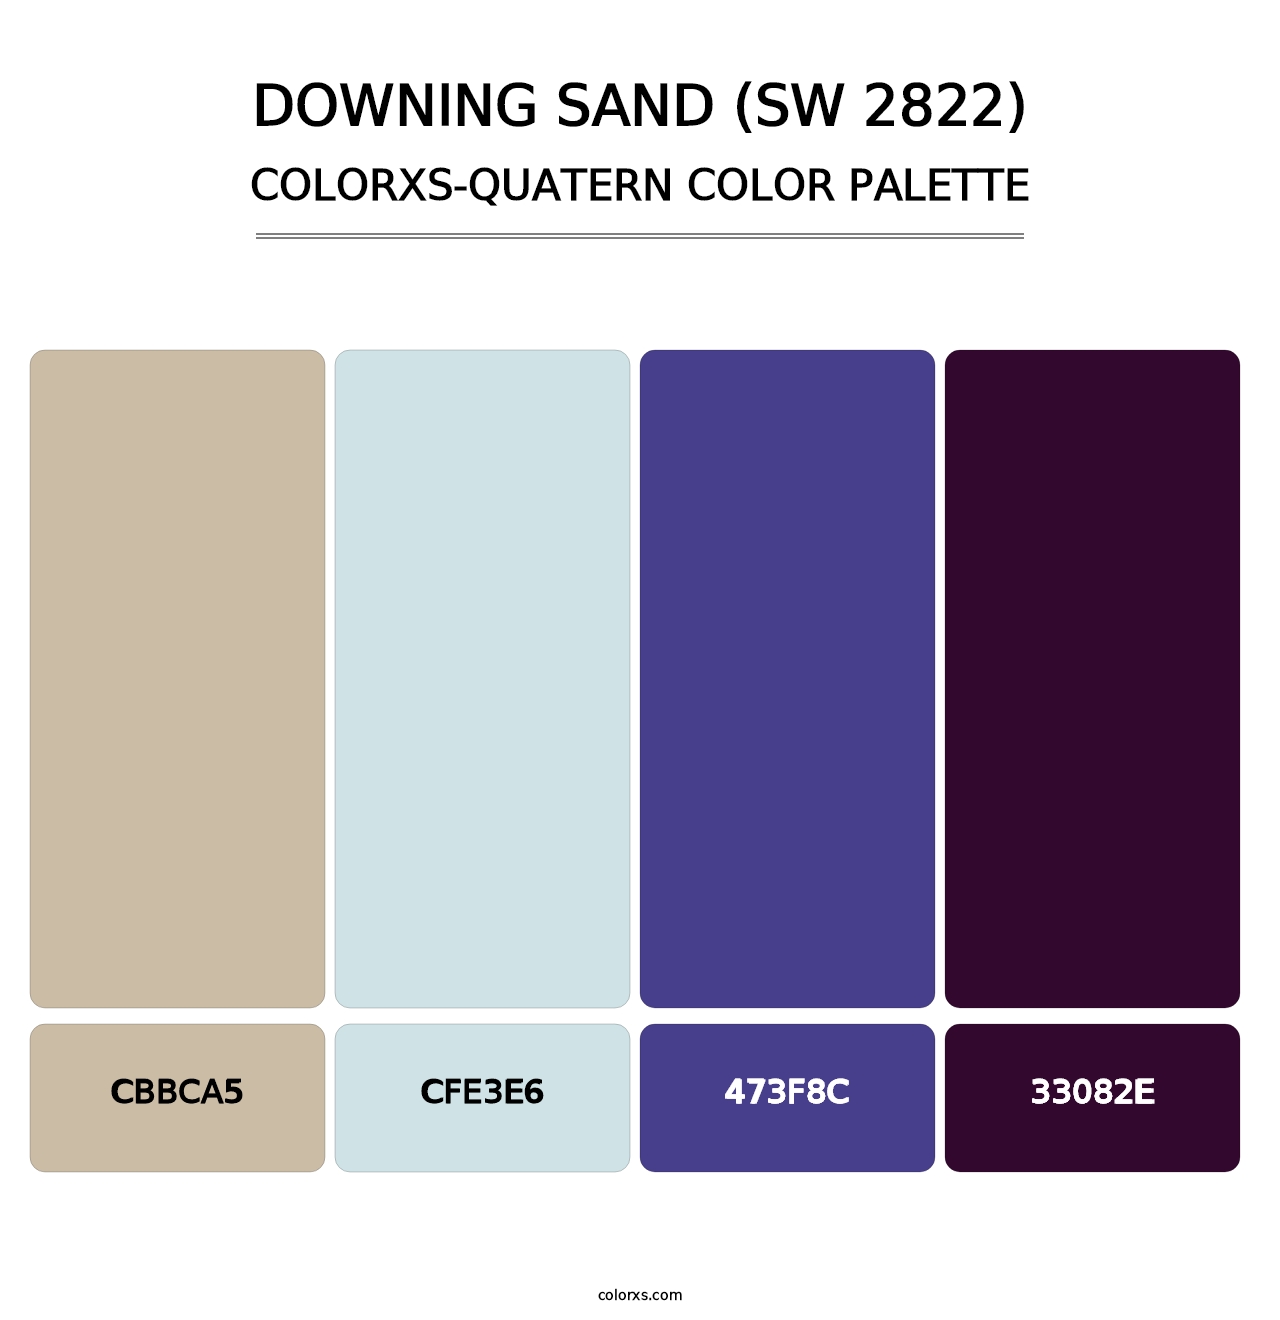 Downing Sand (SW 2822) - Colorxs Quatern Palette